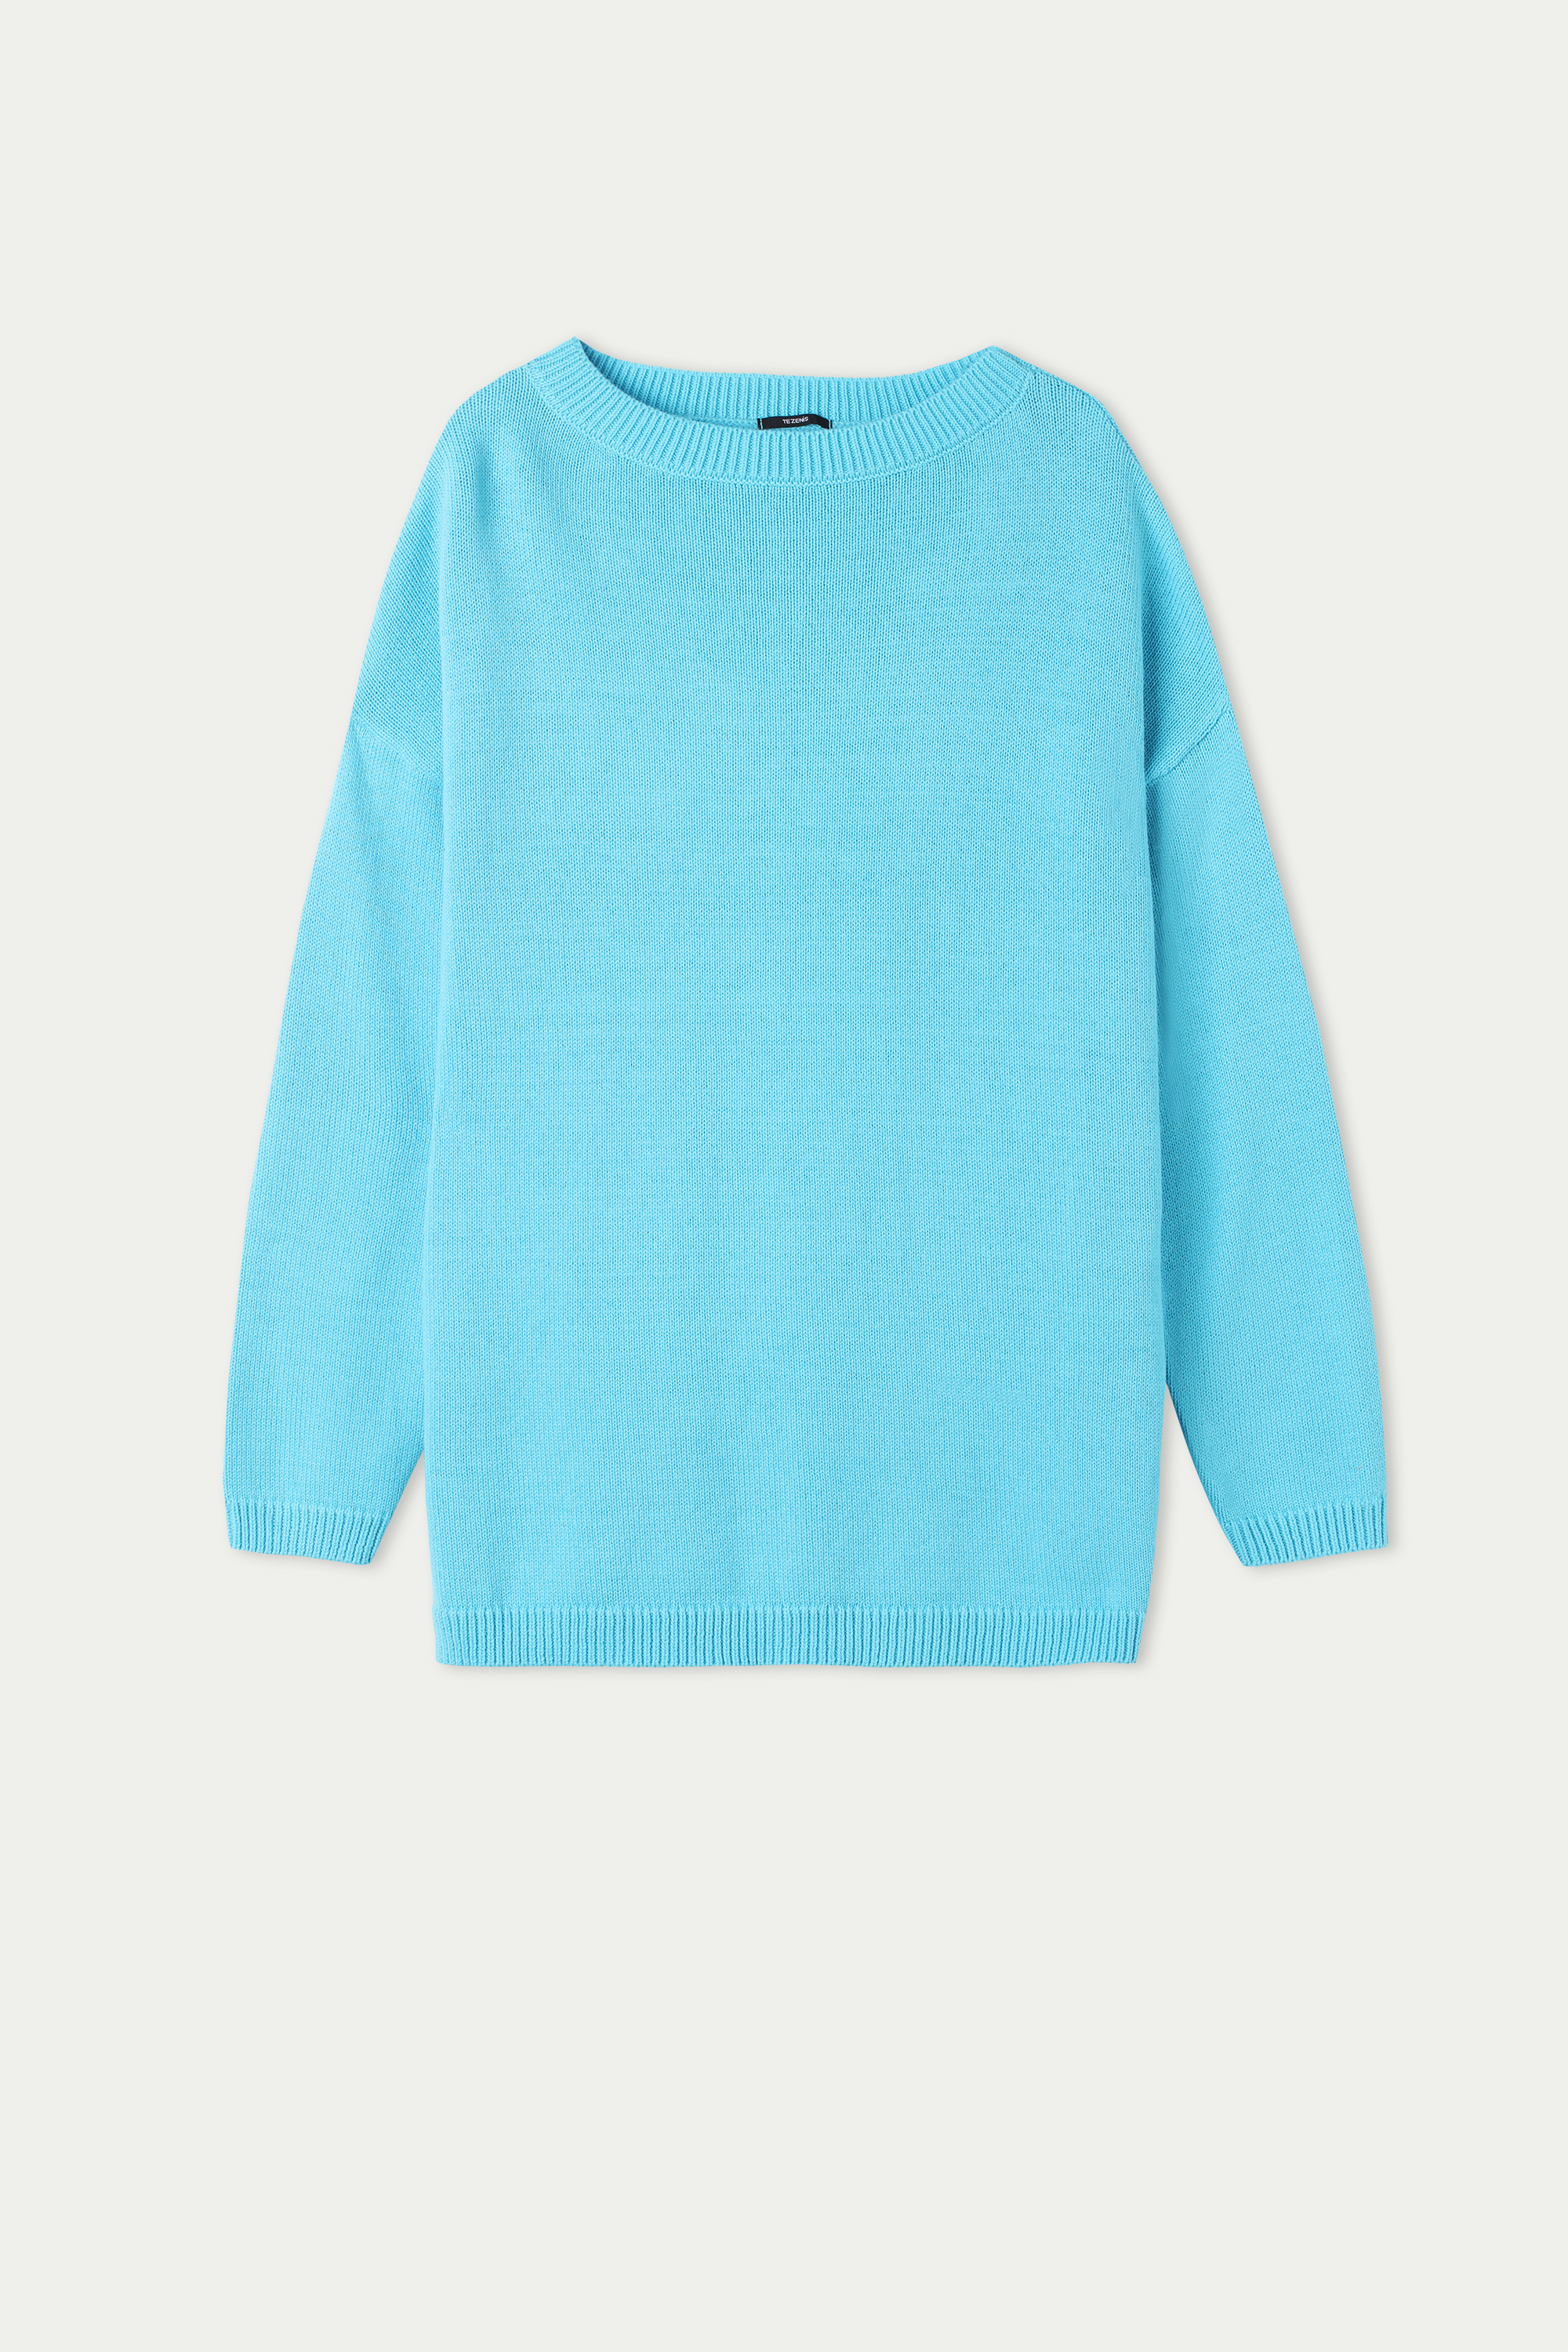 Long Boat Neck Sweater in Fully-Fashioned Cotton